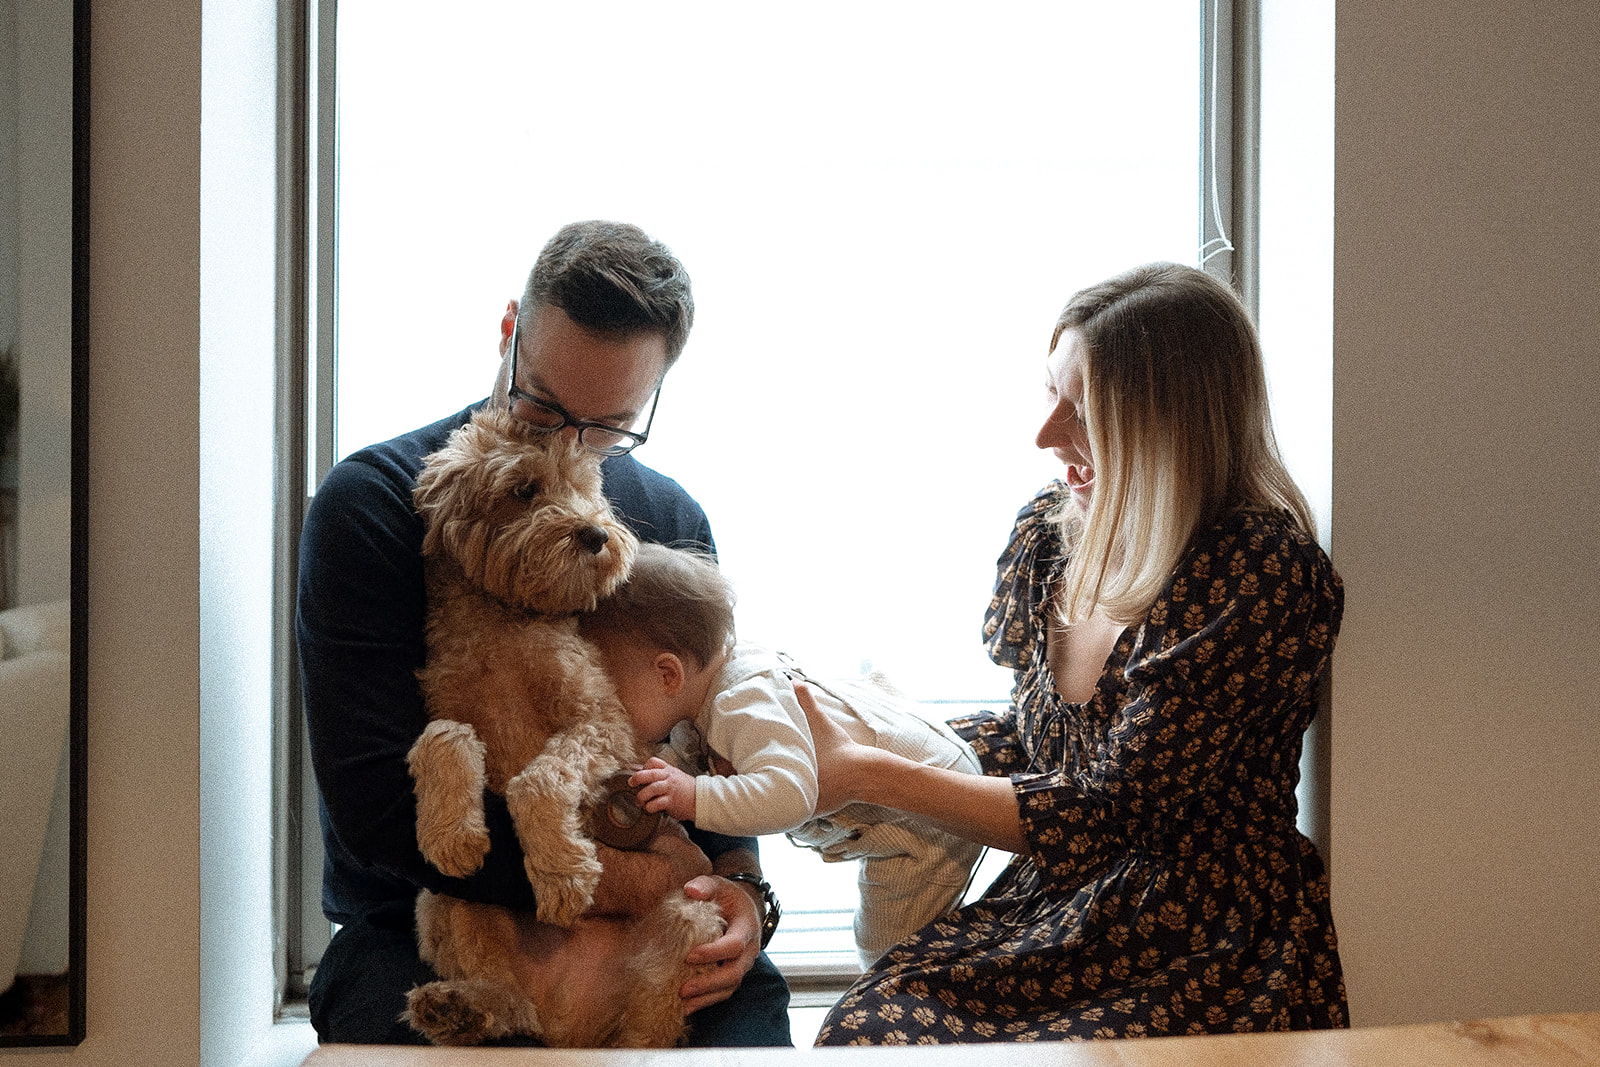 A family photography session at home to celebrate their daughters first birthday